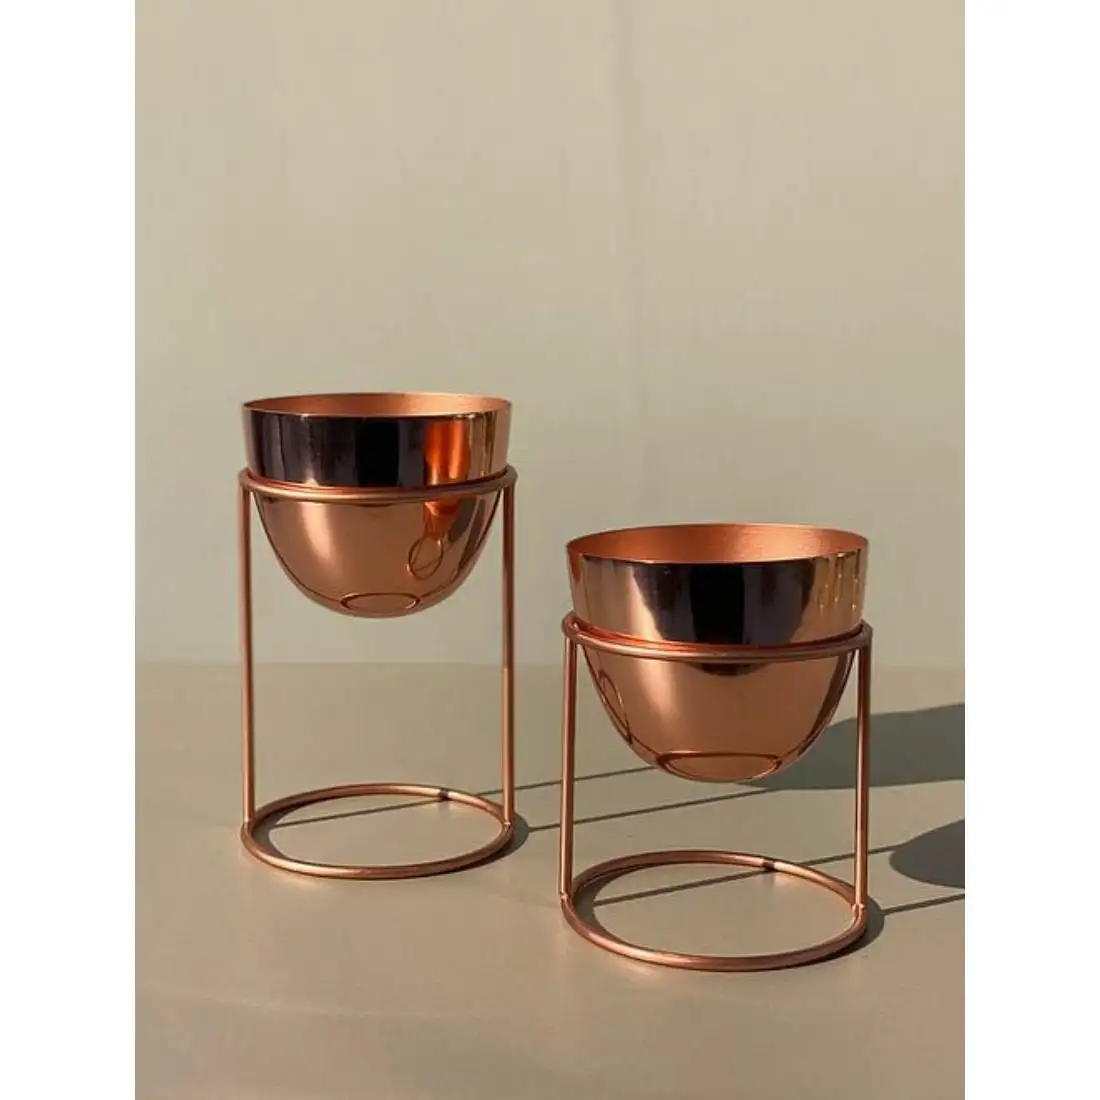 Rose Gold Coated Highly Quality Customized Planter With Stand OEM ODM Customized Made In India Latest Plant For Home Decor